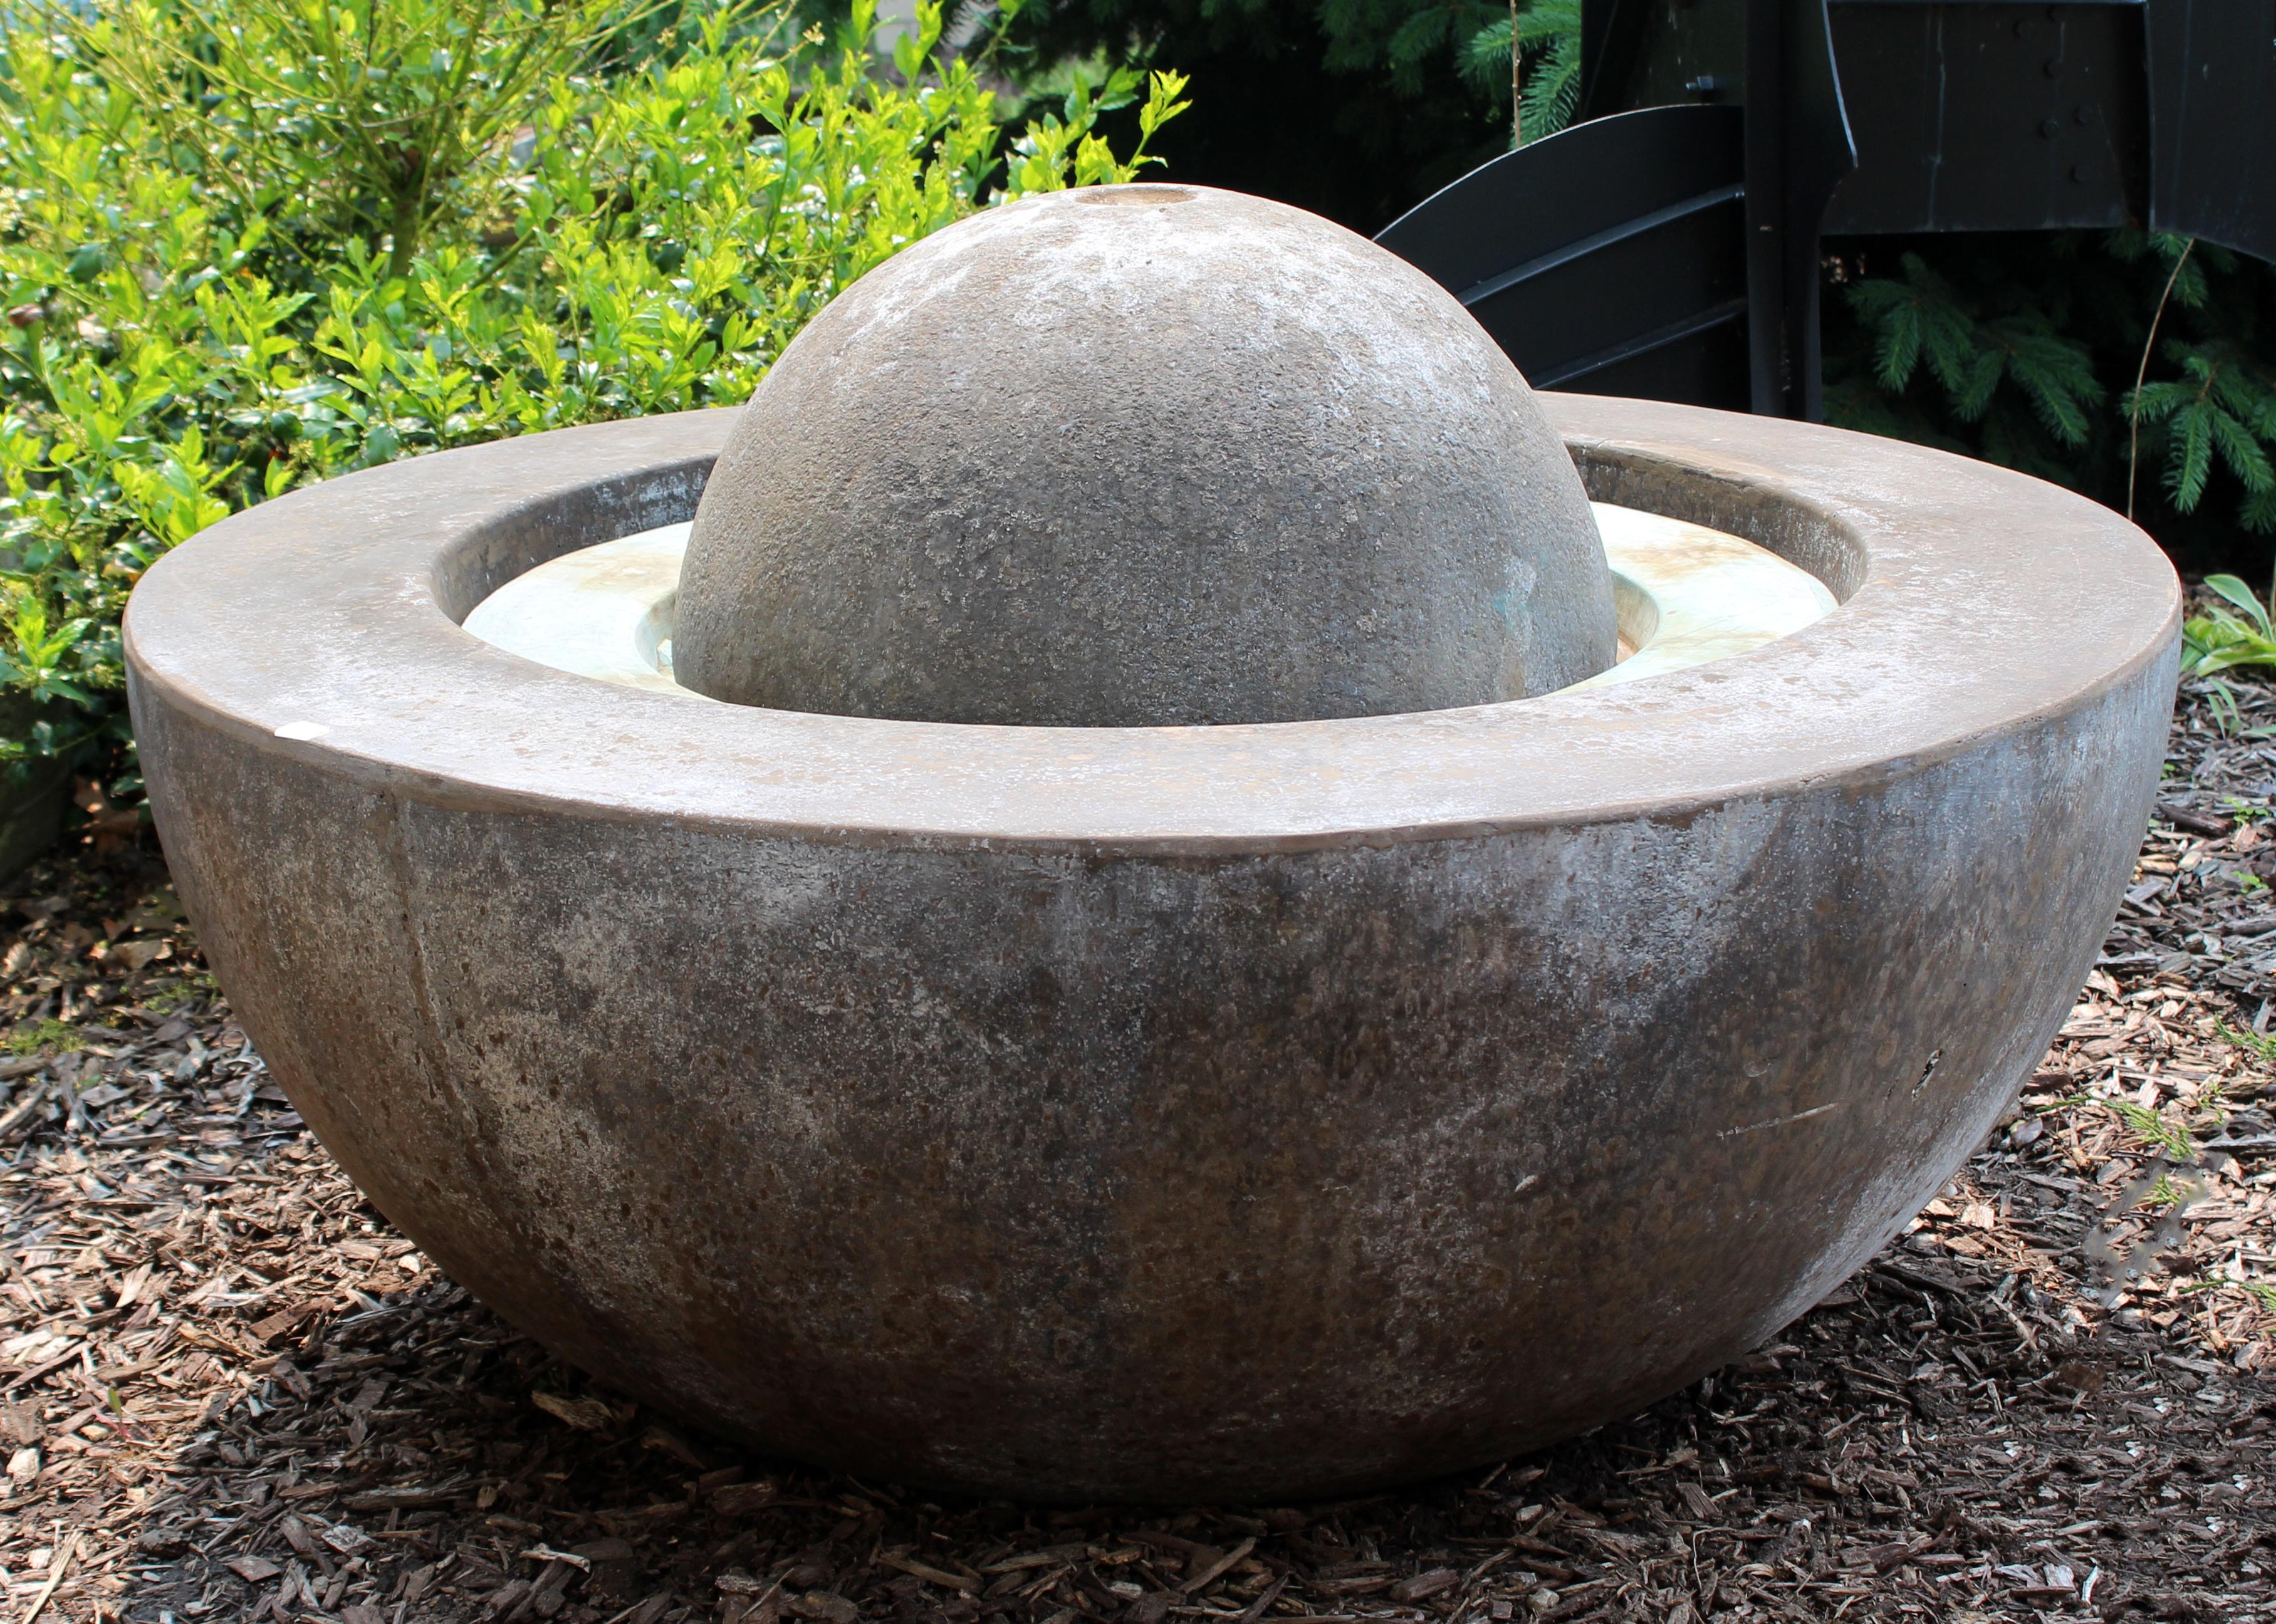 For your consideration is a wonderful, bronze, outdoor, electric water fountain. In very good condition, with a small hole in the side. The dimensions are 39